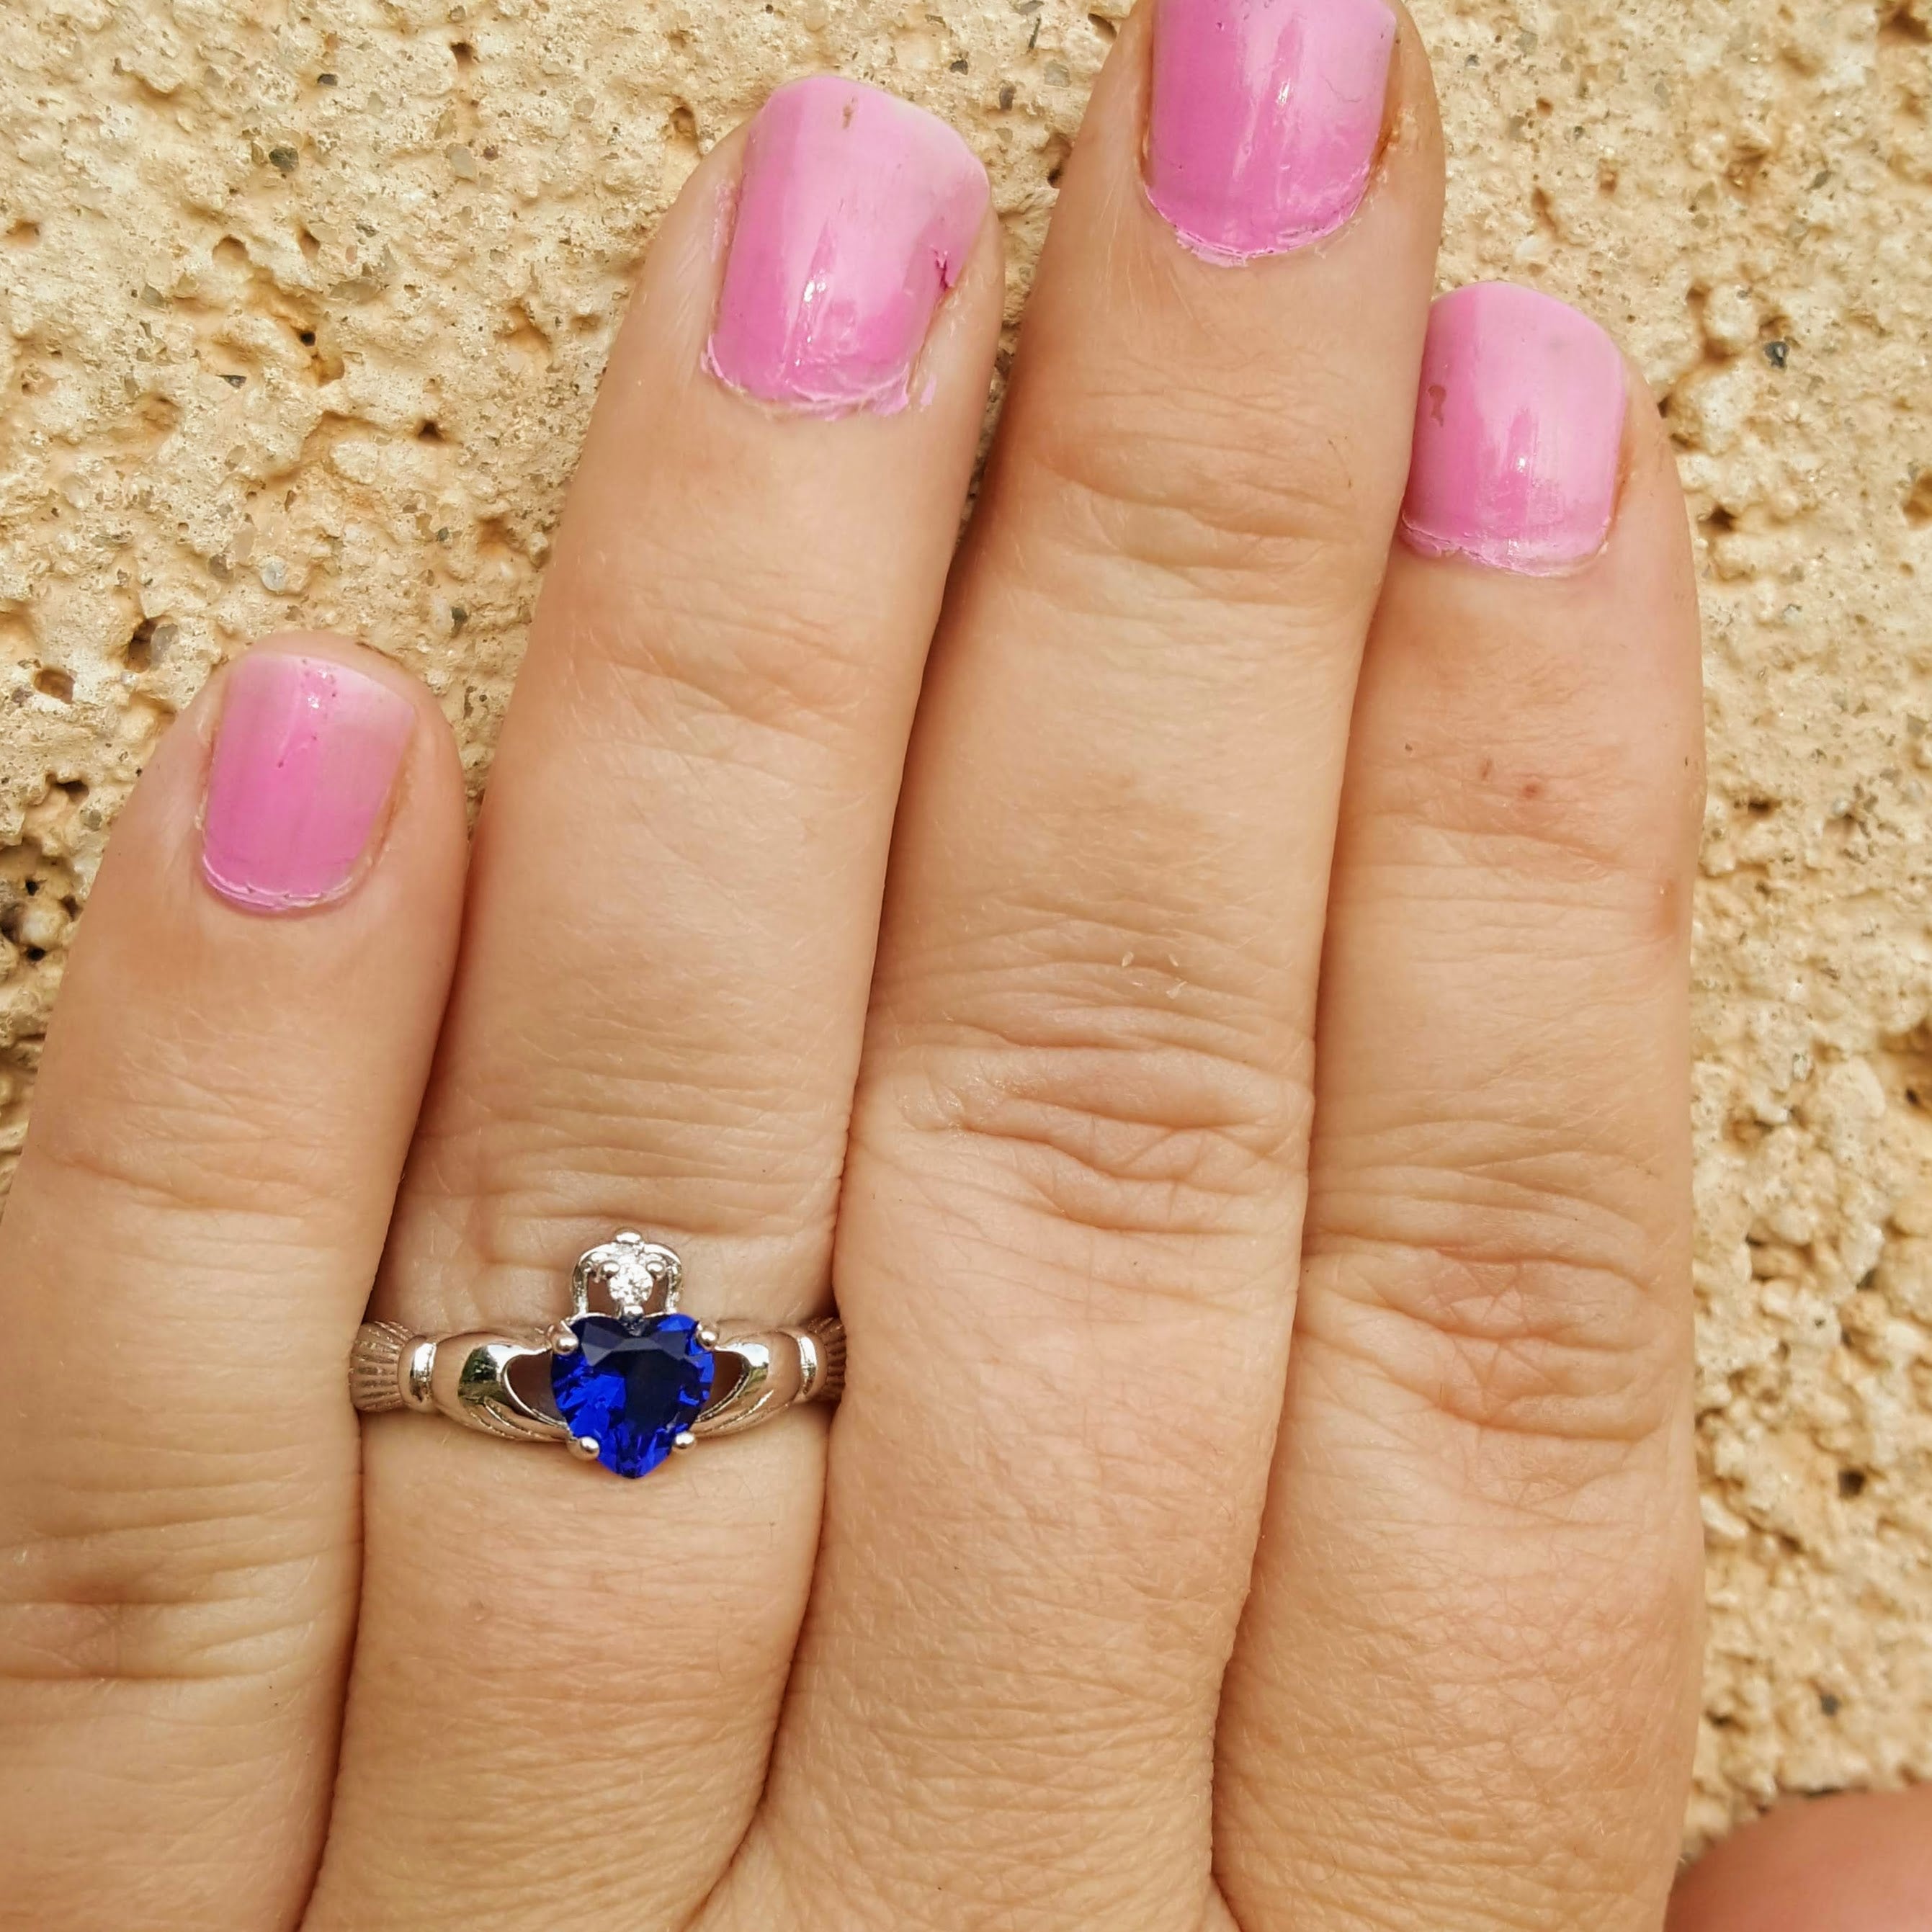 Blue heart ring on hand